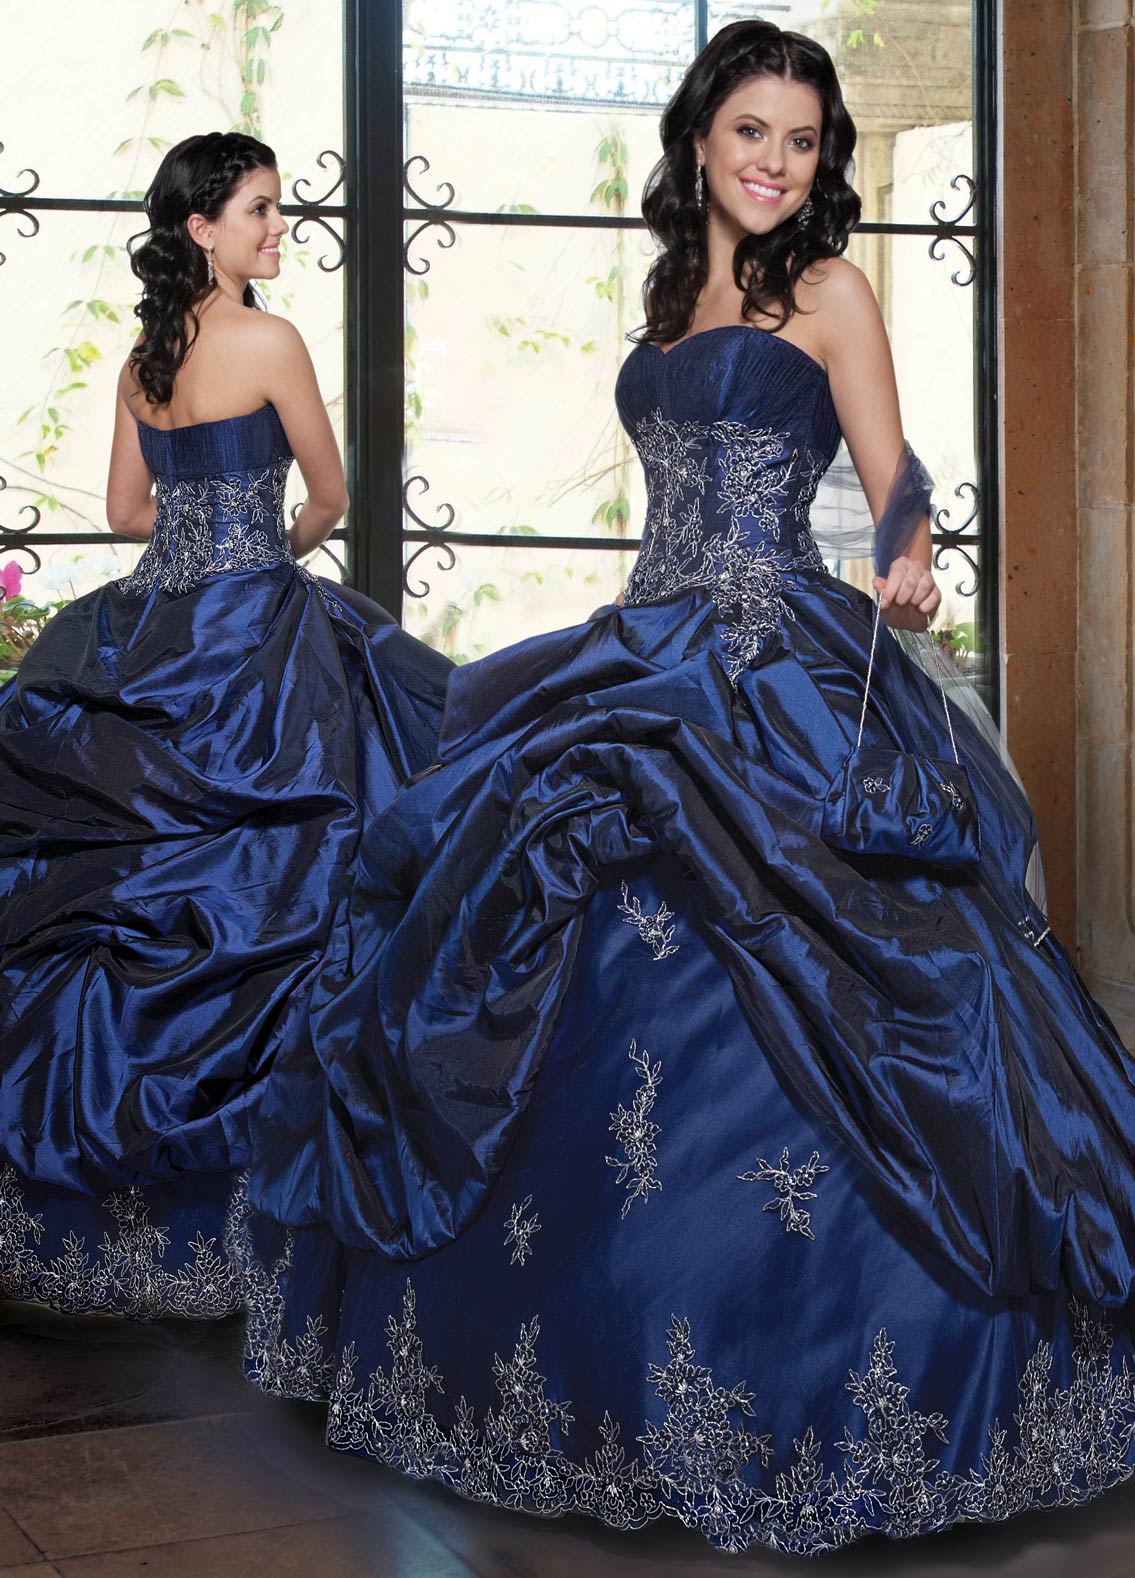 Sweetheart And Strapless Zipper Floor Length Royal Blue Ball Gown Quinceanera Dresses With Beading Appliques And Ruffles 